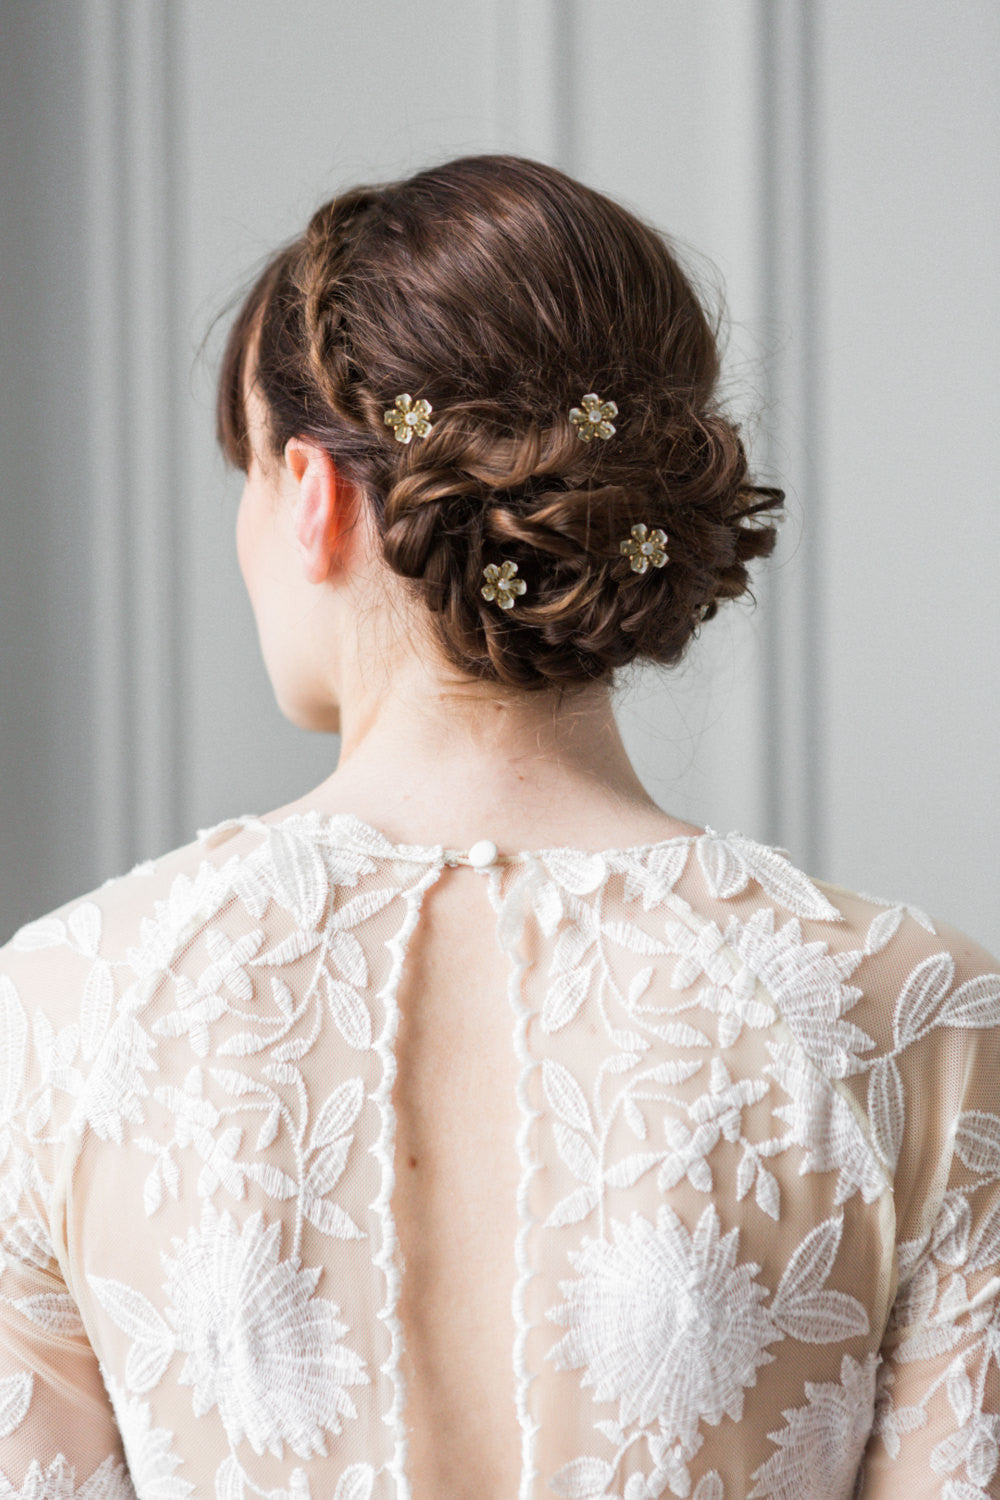 Model with hair pins in her bun wearing a wedding dress